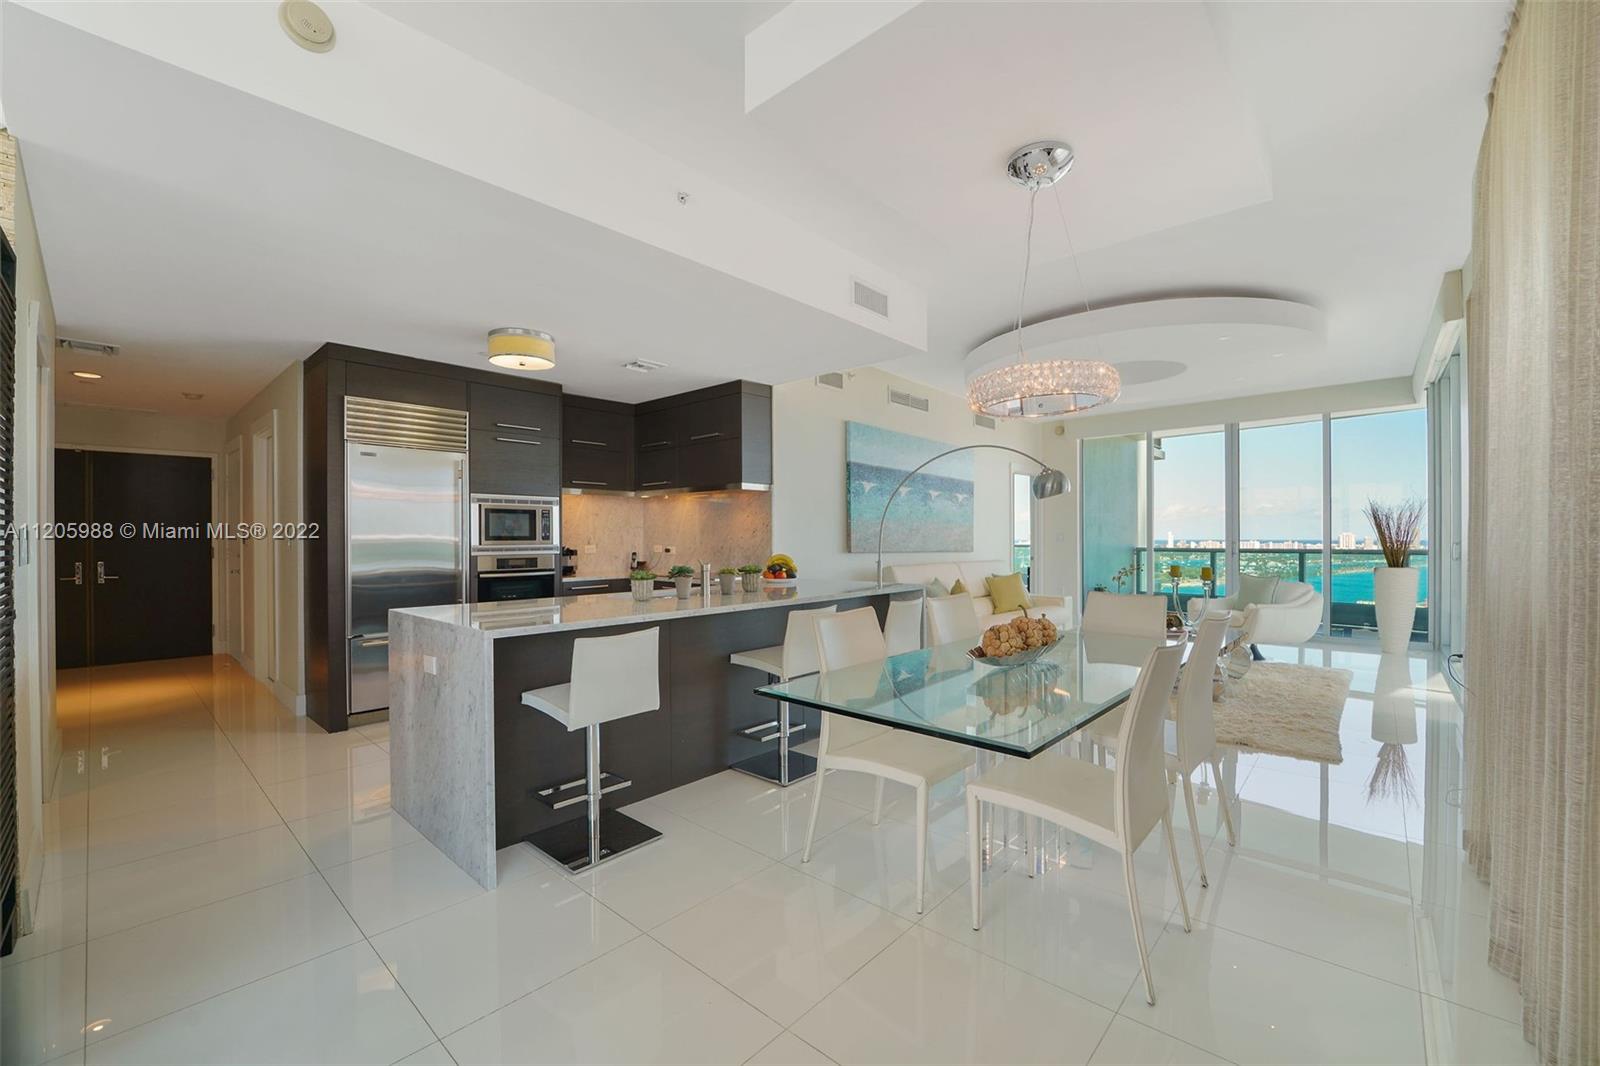 Photo 1 of 900 Biscayne Bay Apt 2901 in Miami - MLS A11205988